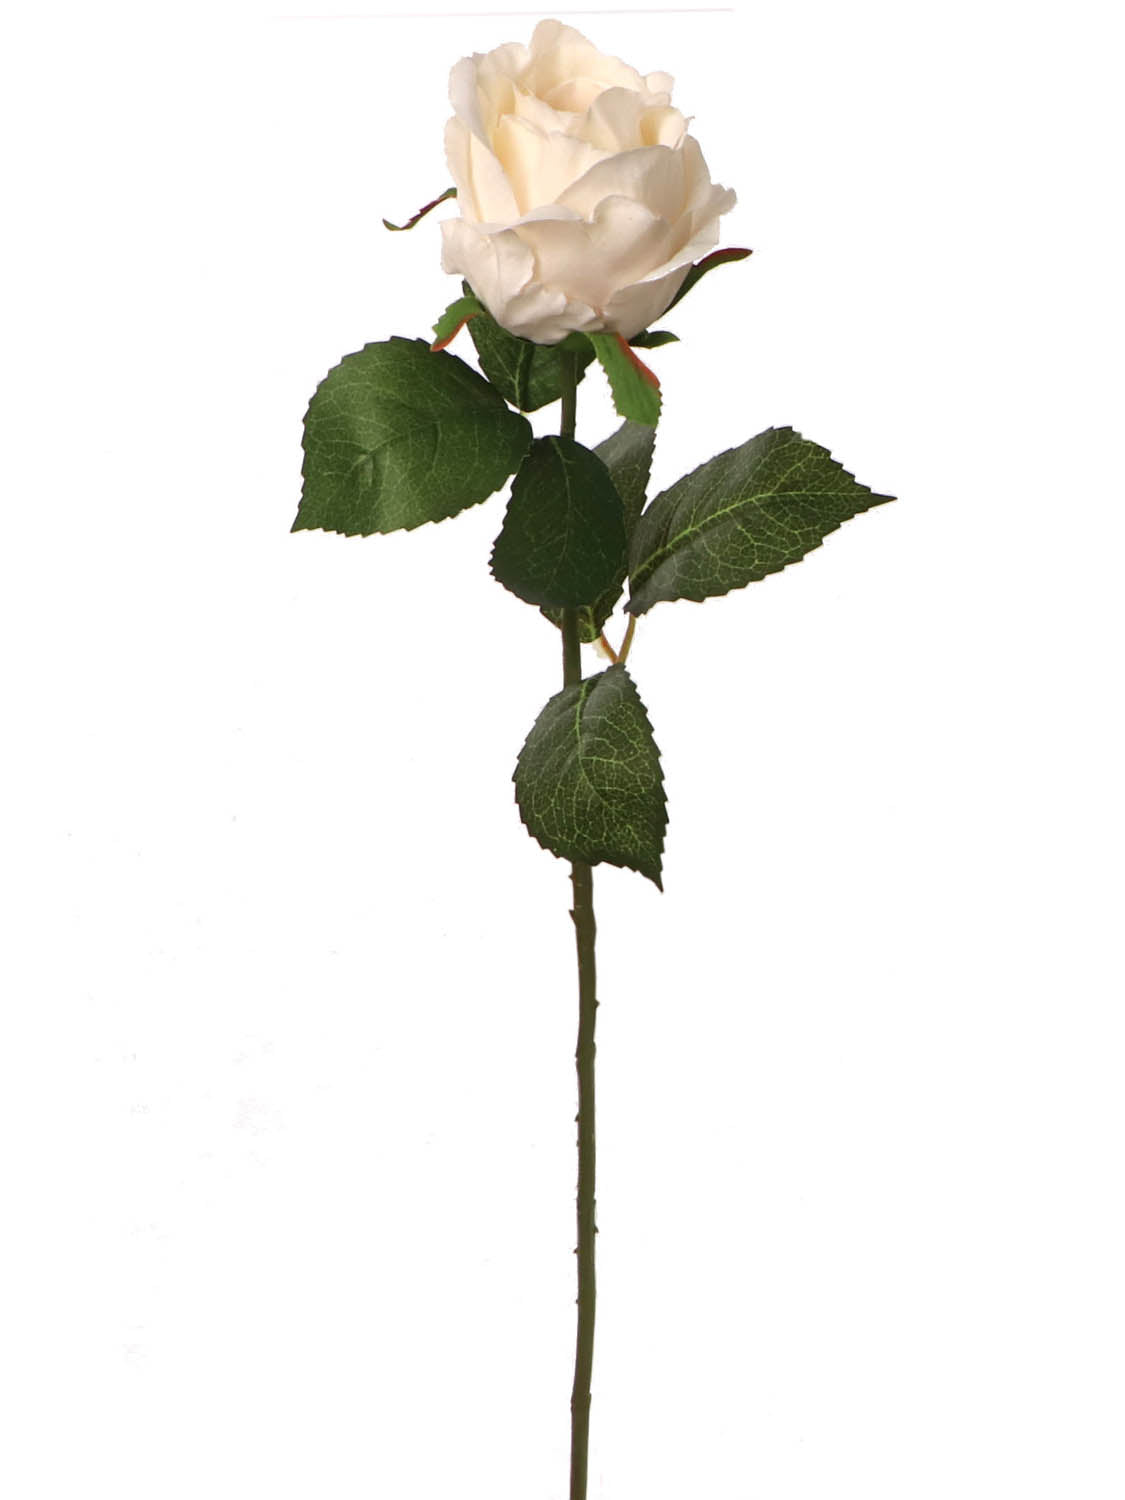 Timeless Elegance: 20" Cream Rose Bud Set - Pack of 48 Realistic Faux Flowers - Ideal for Home Decor, Weddings & Special Occasions